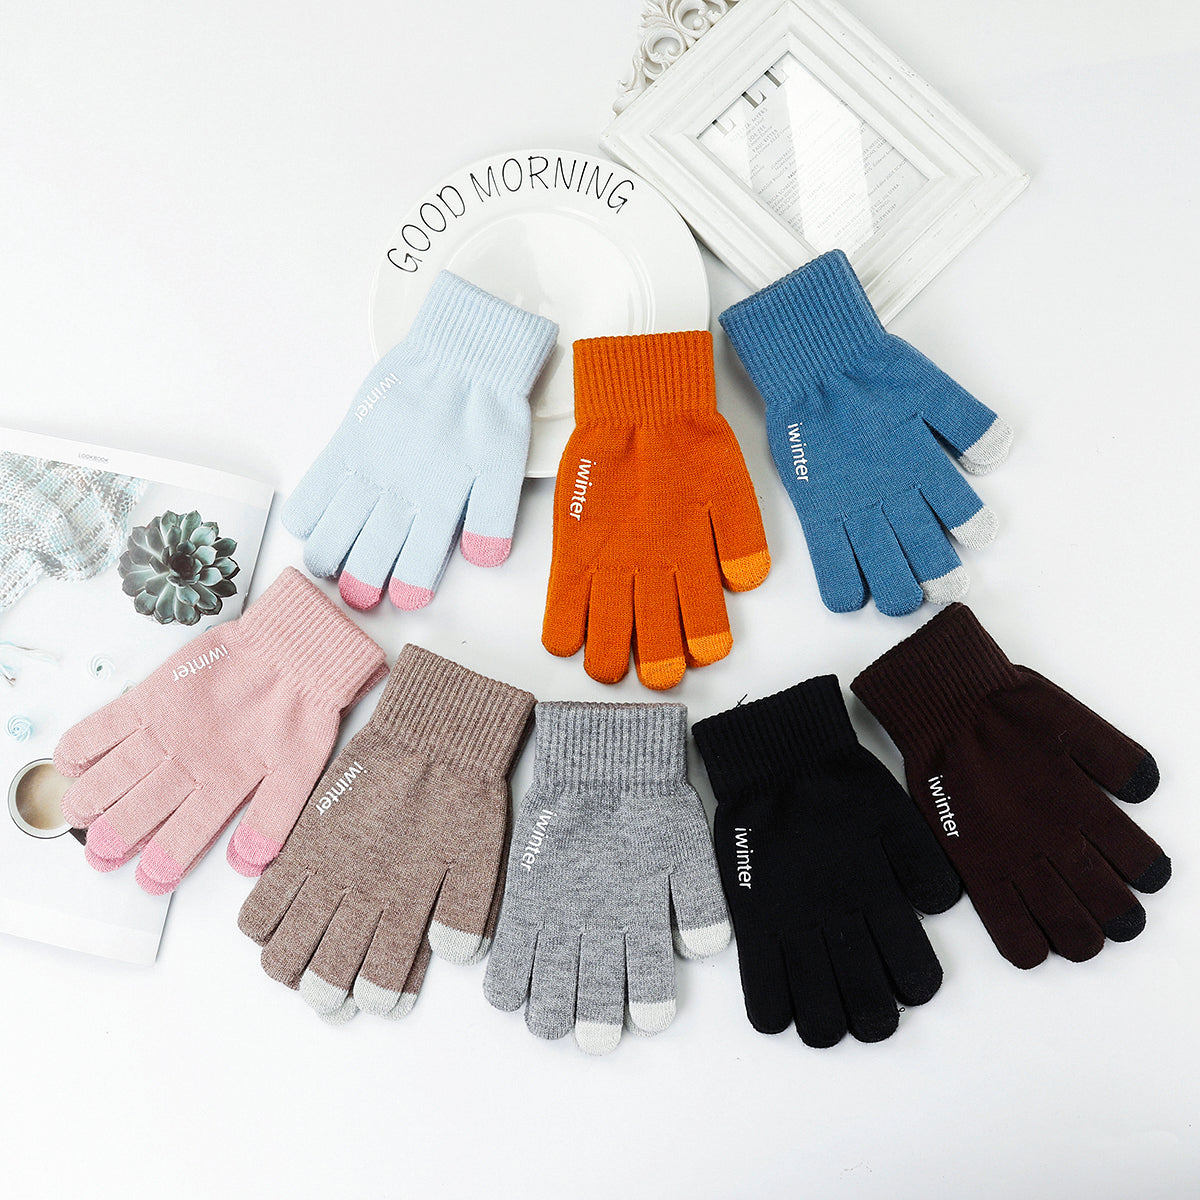 Sienna Knitted Touch Screen Outdoor Gloves Motorcycle Winter Warm Windproof Fleece Lined Thermal Non-slip